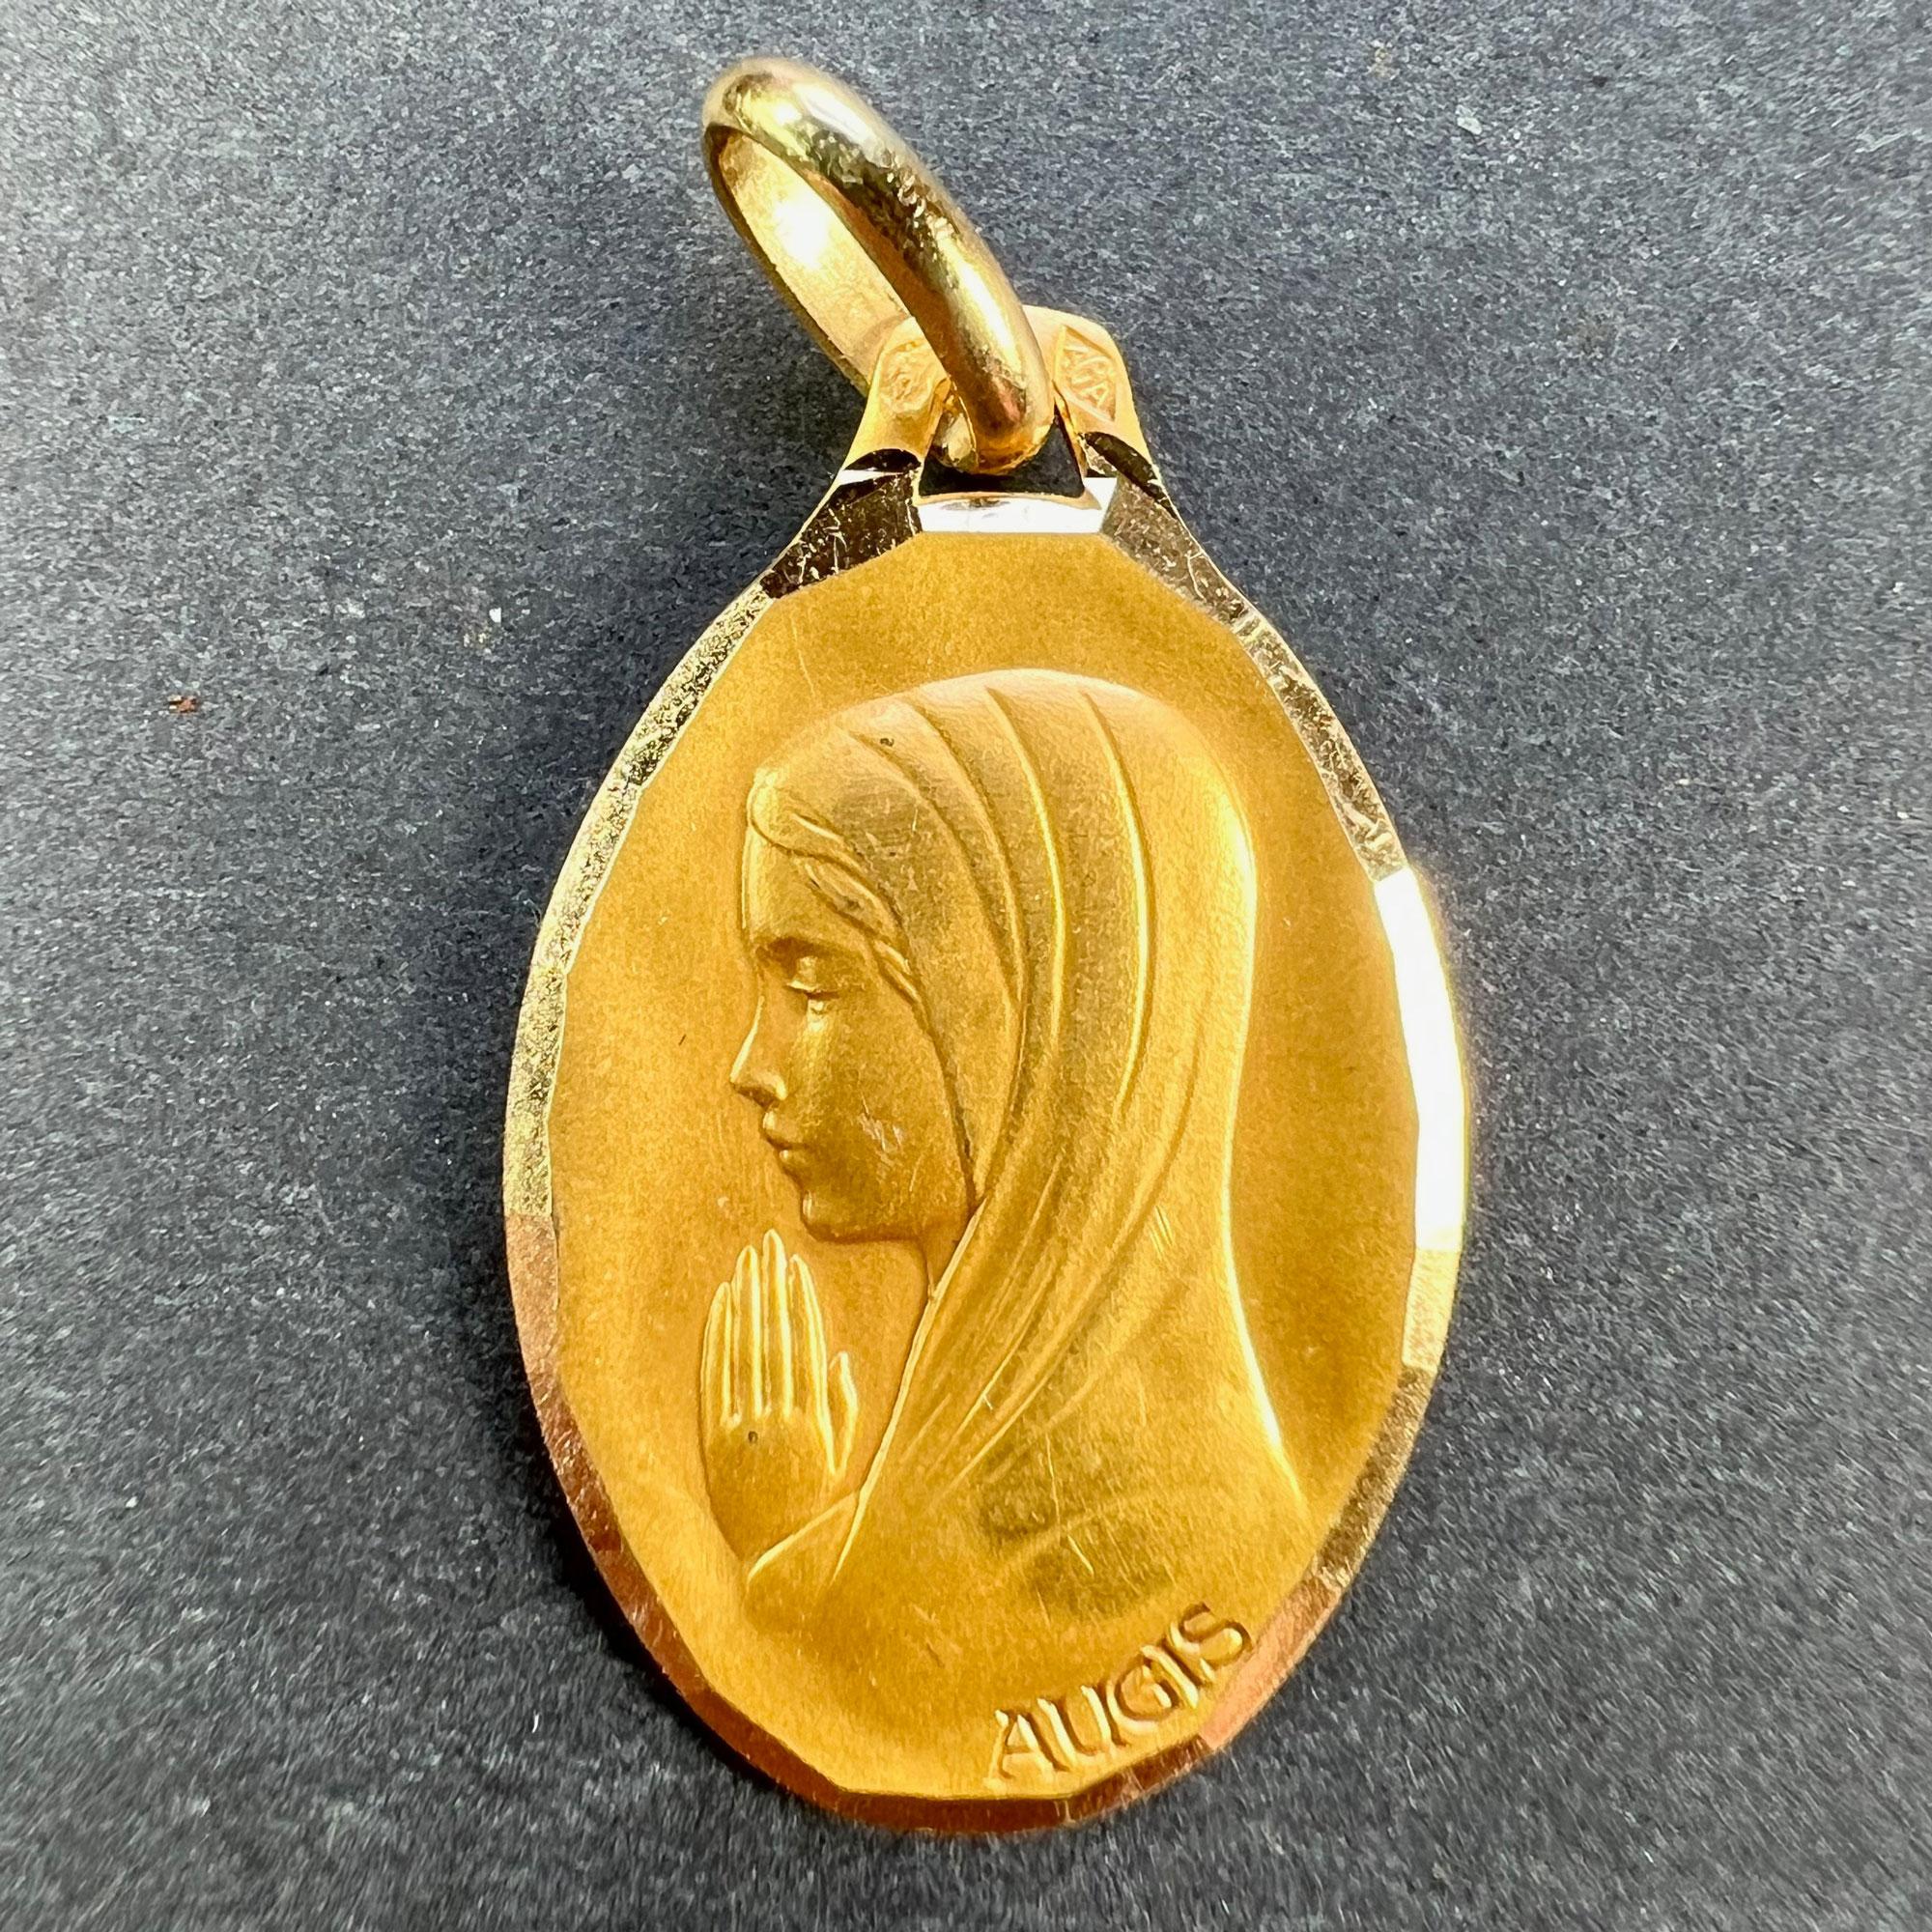 A French 18 karat (18K) yellow gold pendant designed as an oval medal depicting the Virgin Mary within a faceted frame. Signed Augis. Stamped with the eagle’s head for French manufacture and 18 karat gold, with maker’s mark for Augis.

Dimensions: